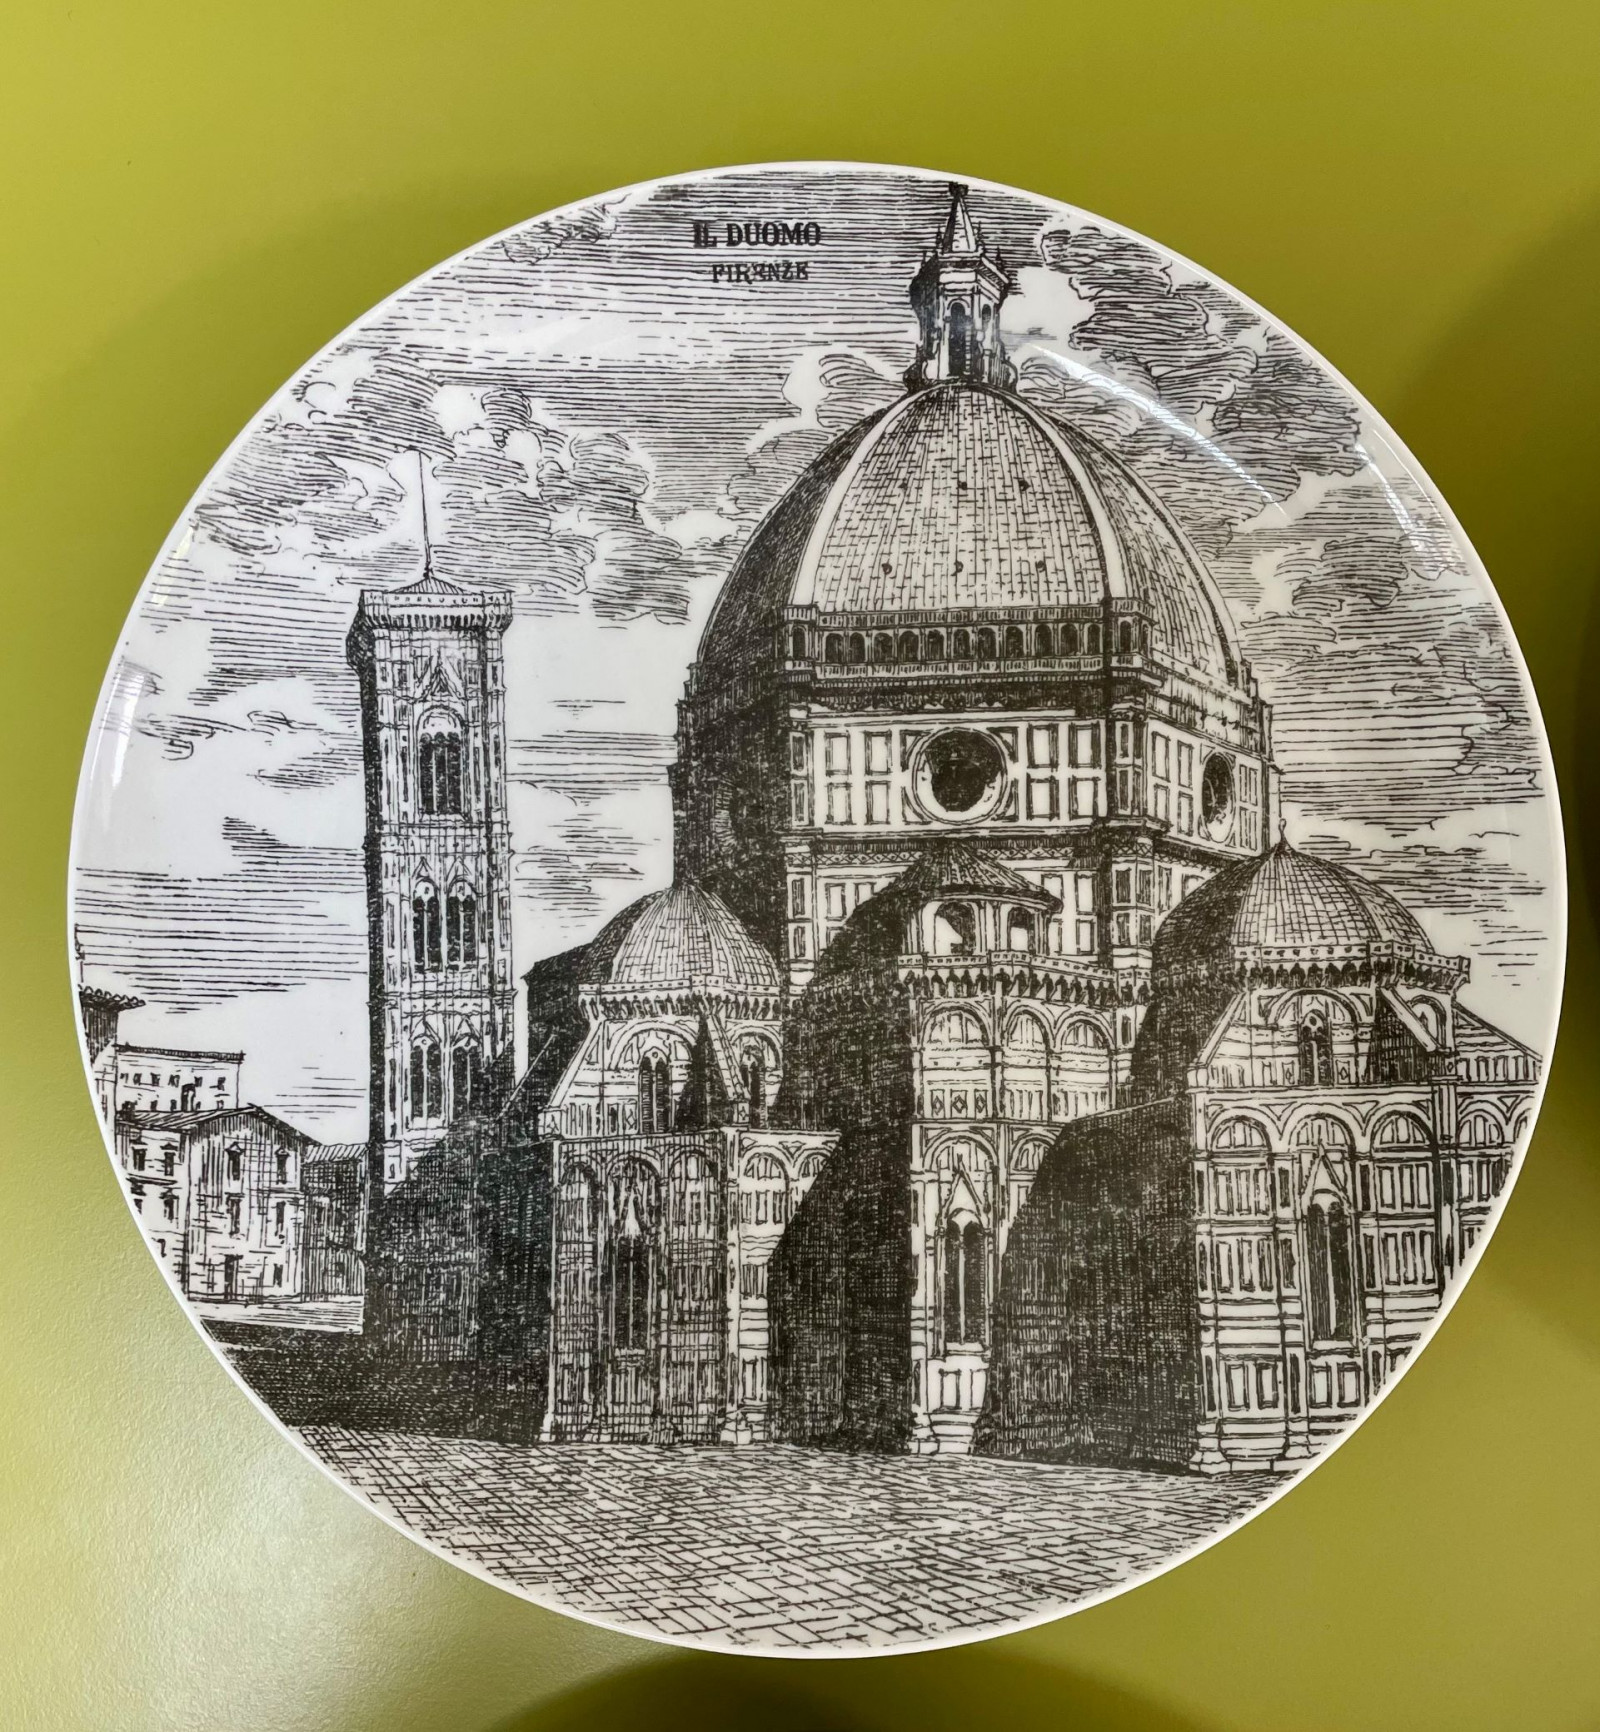 The " Serie Firenze" 1960s Plates by Fornasetti